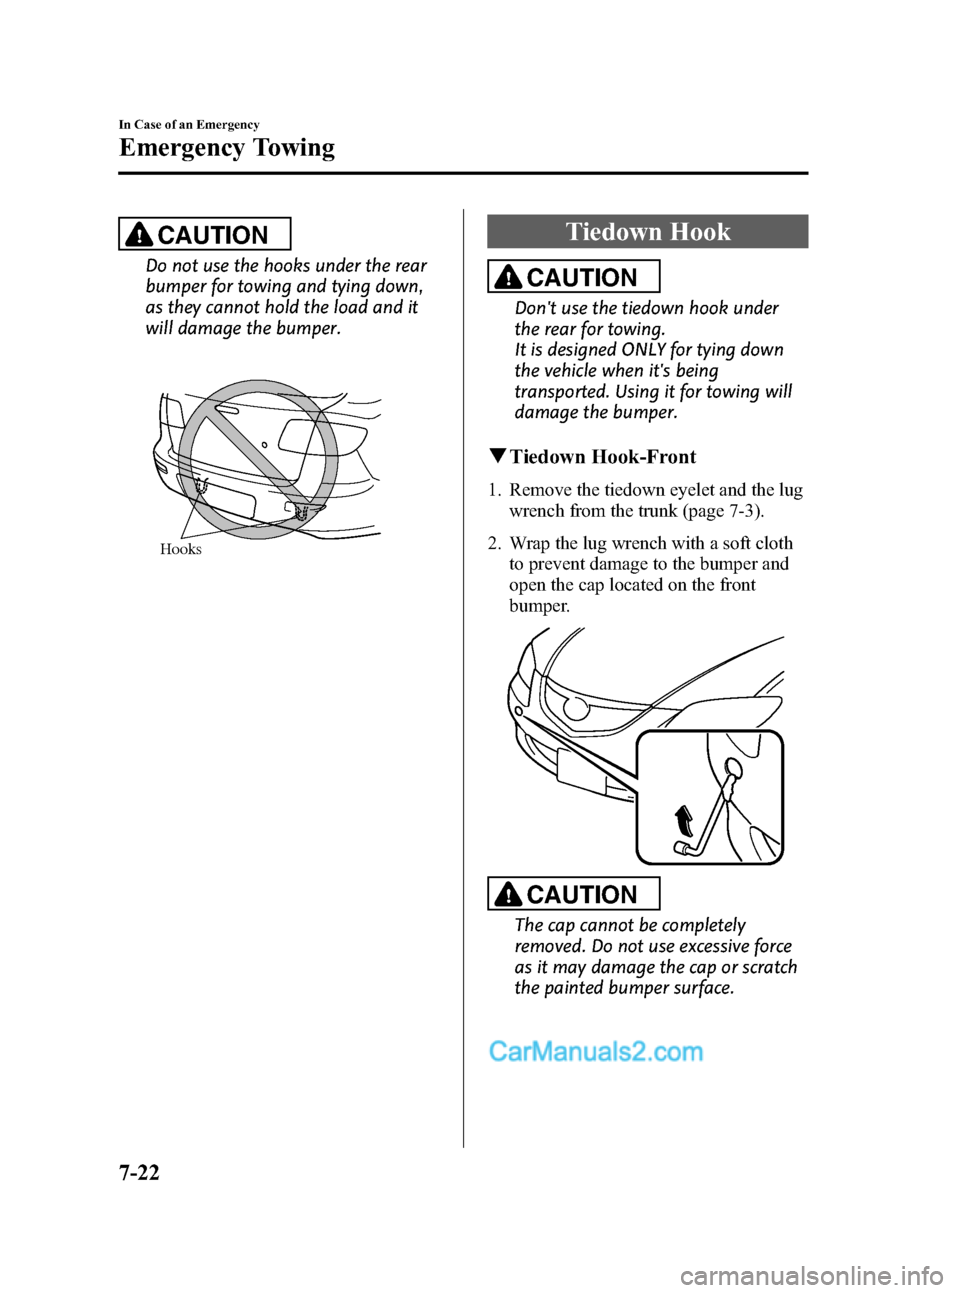 MAZDA MODEL MAZDASPEED 3 2008  Owners Manual (in English) Black plate (266,1)
CAUTION
Do not use the hooks under the rear
bumper for towing and tying down,
as they cannot hold the load and it
will damage the bumper.
Hooks
Tiedown Hook
CAUTION
Dont use the t